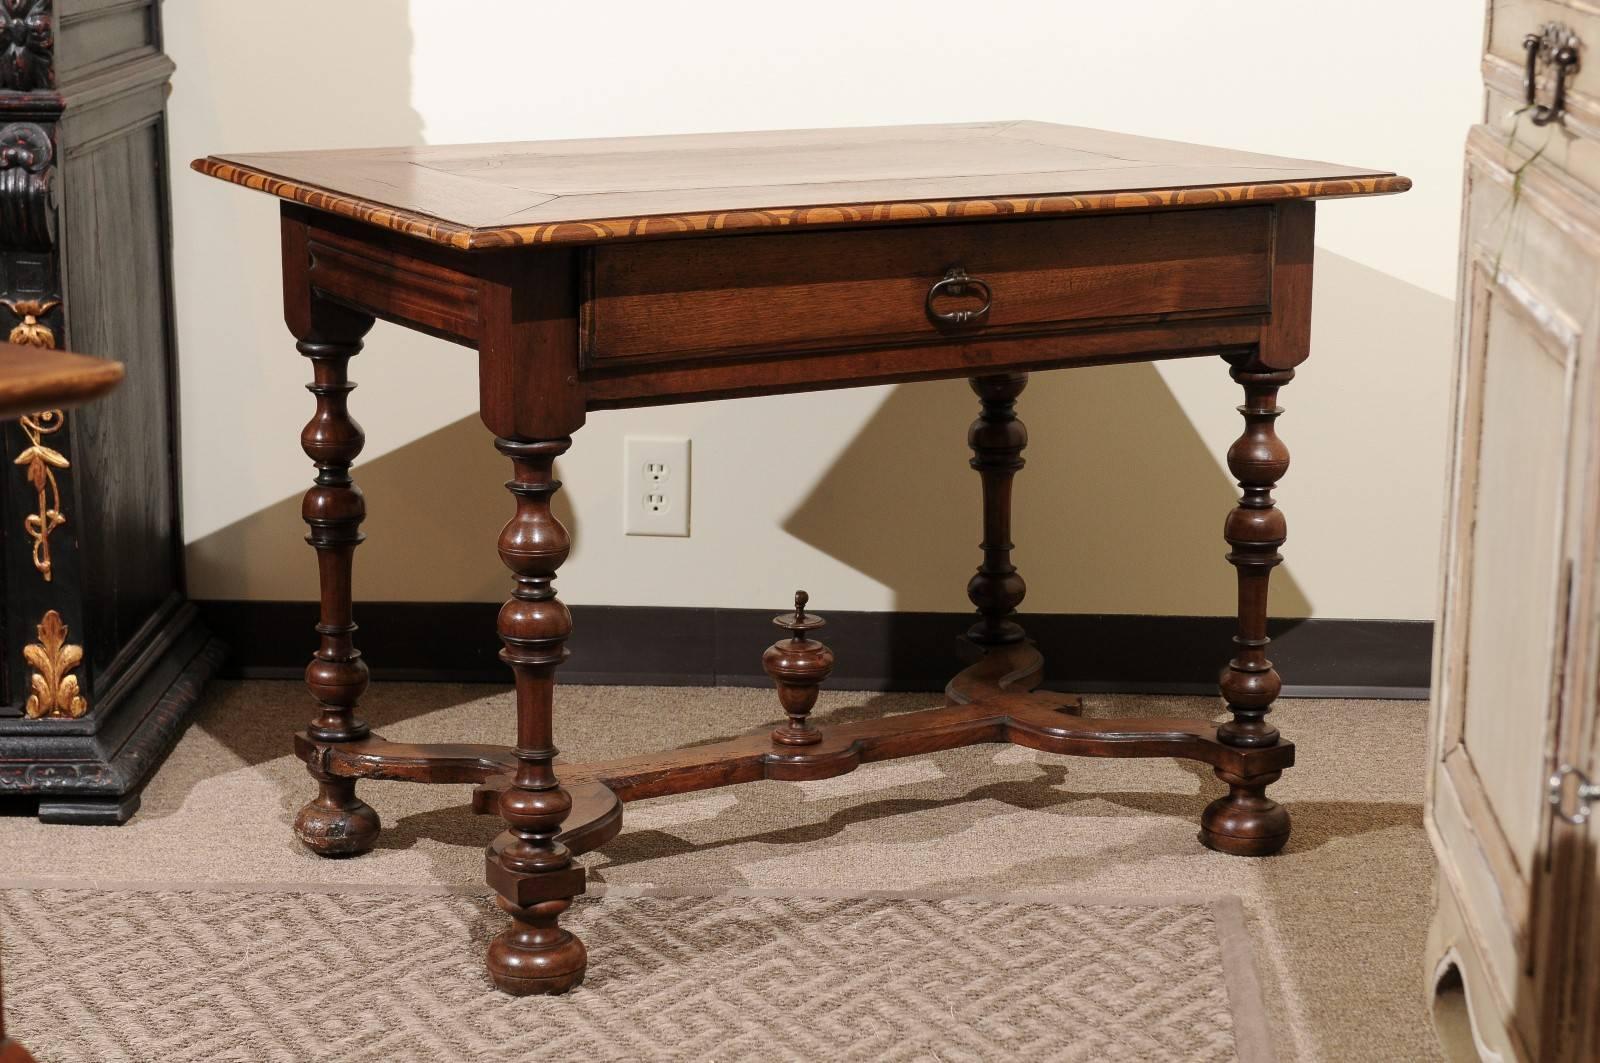 18th century French walnut side table, circa 1790
A charming table with a simple inlay design on the top. The turned legs and stretcher make this table interesting as well.